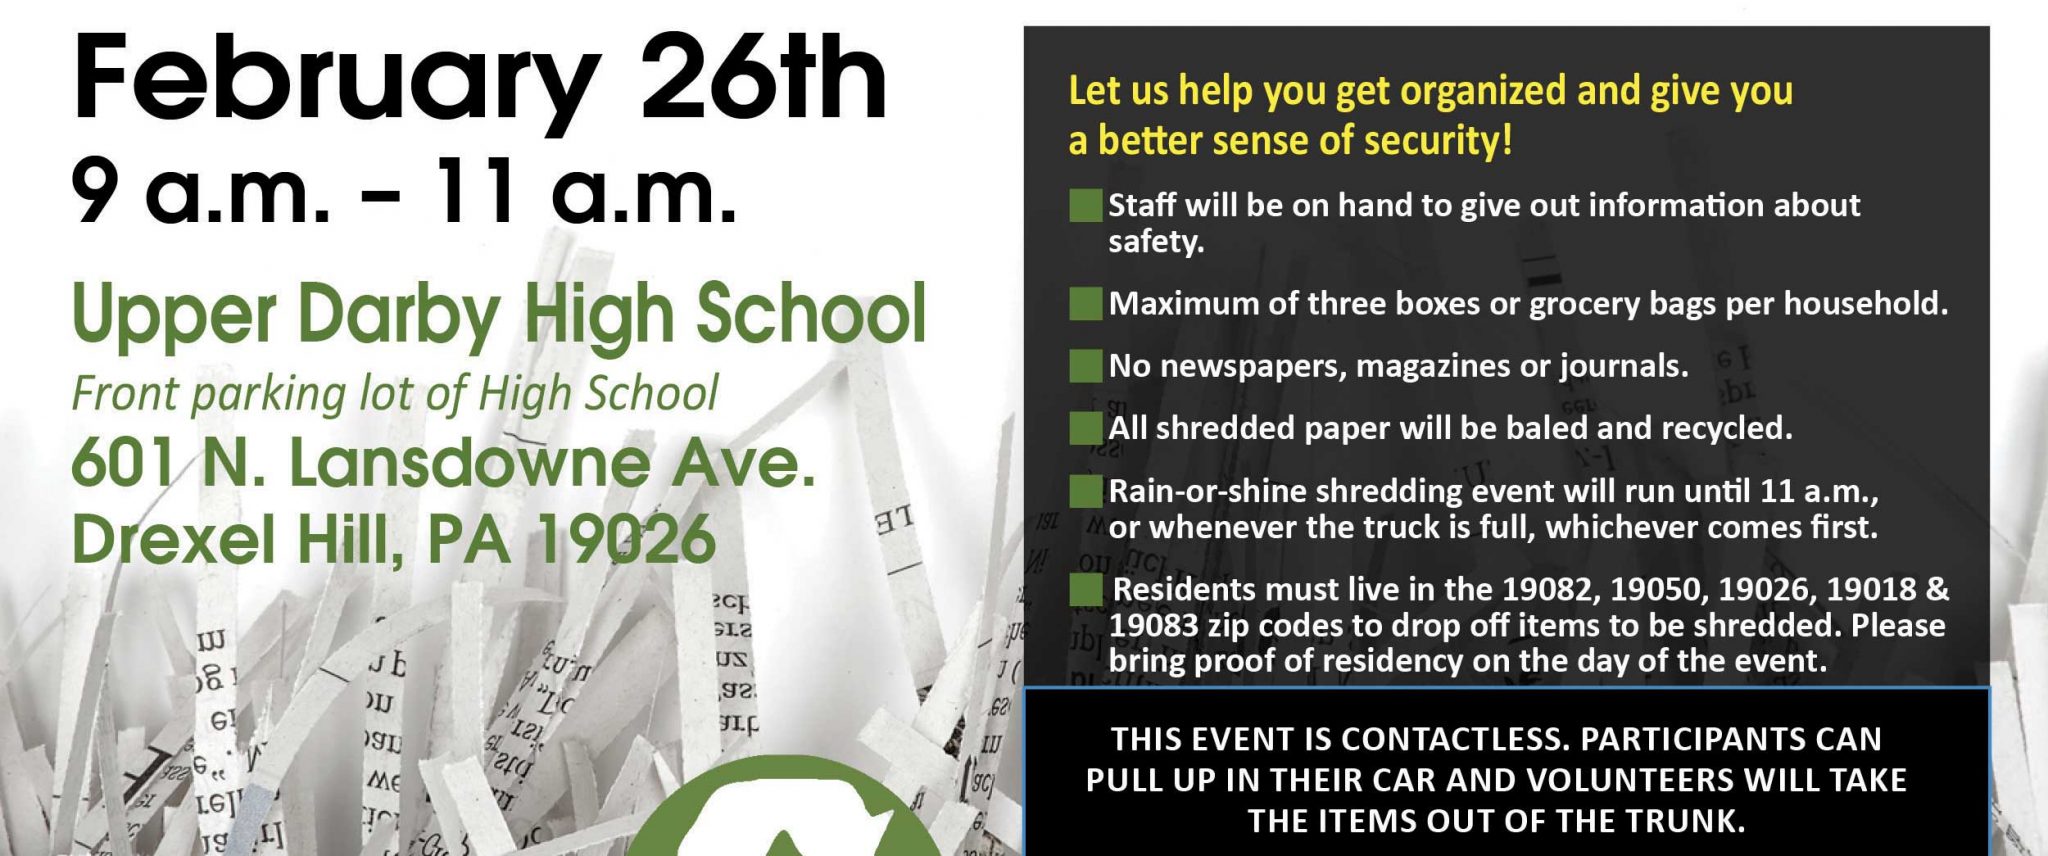 Free Shredding & Safety Event Delaware County District Attorneys Office